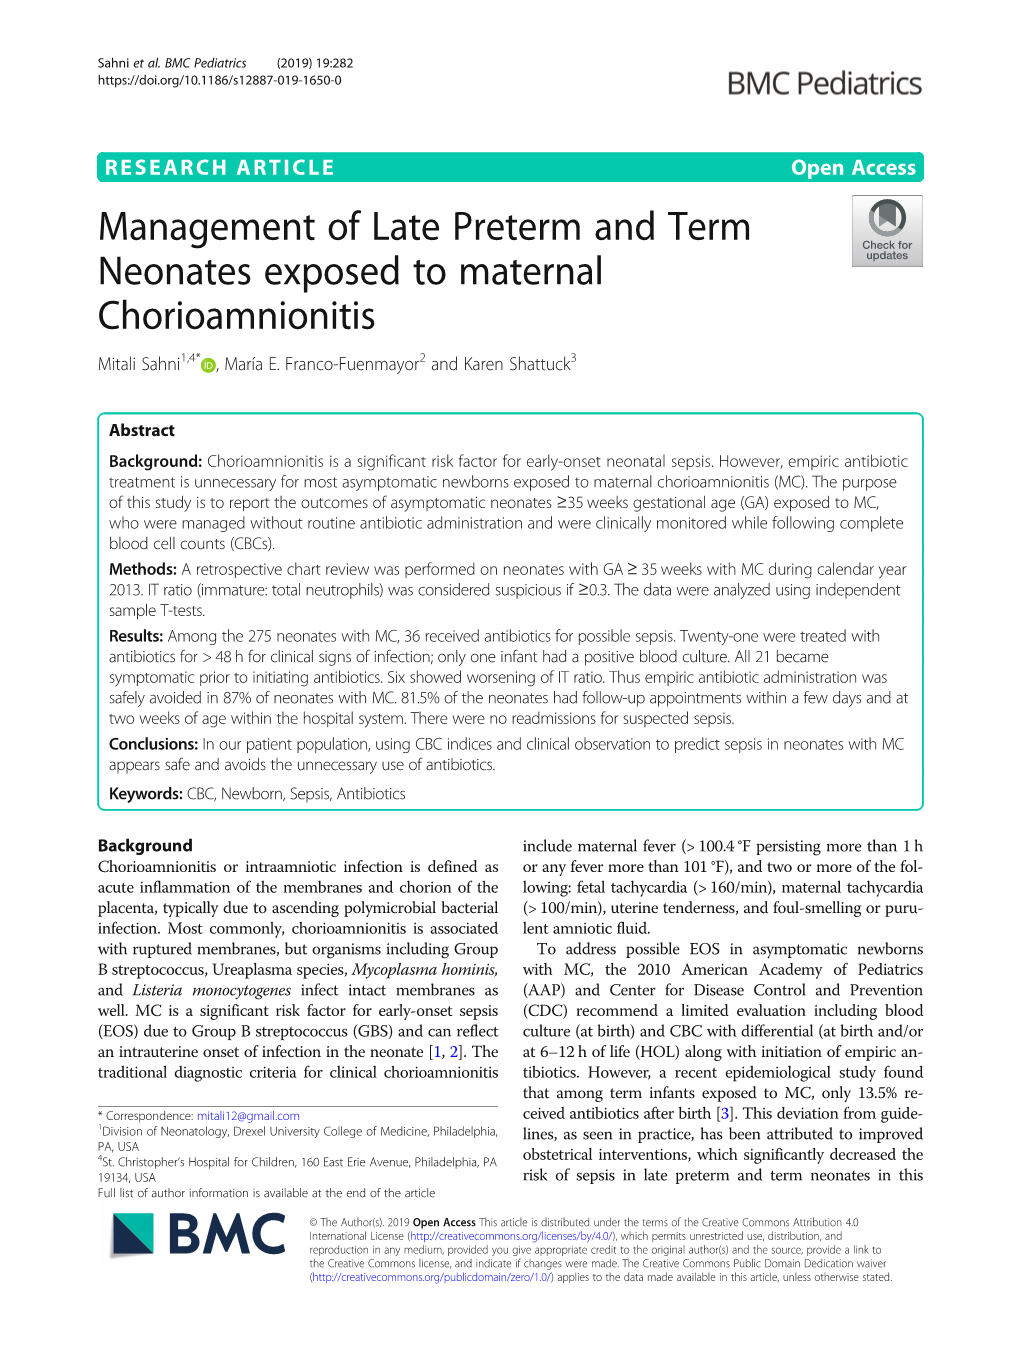 Management of Late Preterm and Term Neonates Exposed to Maternal Chorioamnionitis Mitali Sahni1,4* , María E